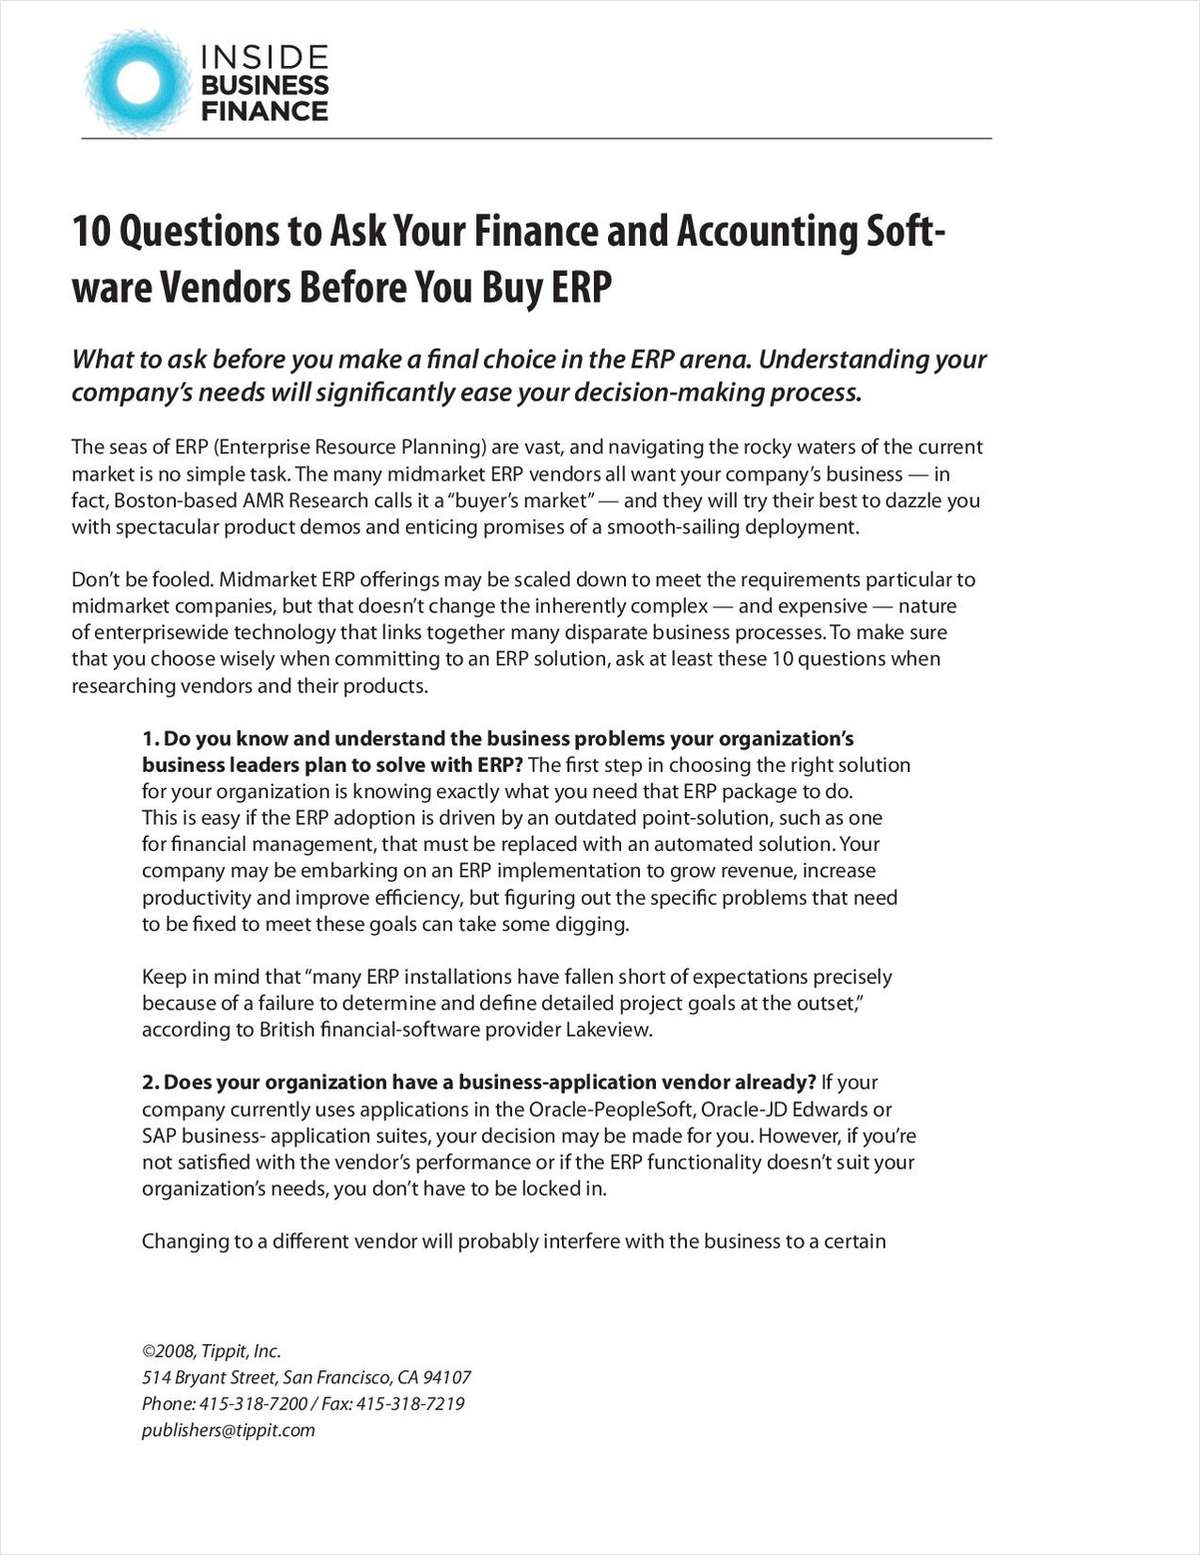 10 Questions to Ask Your Finance and Accounting Software Vendors Before You Buy ERP